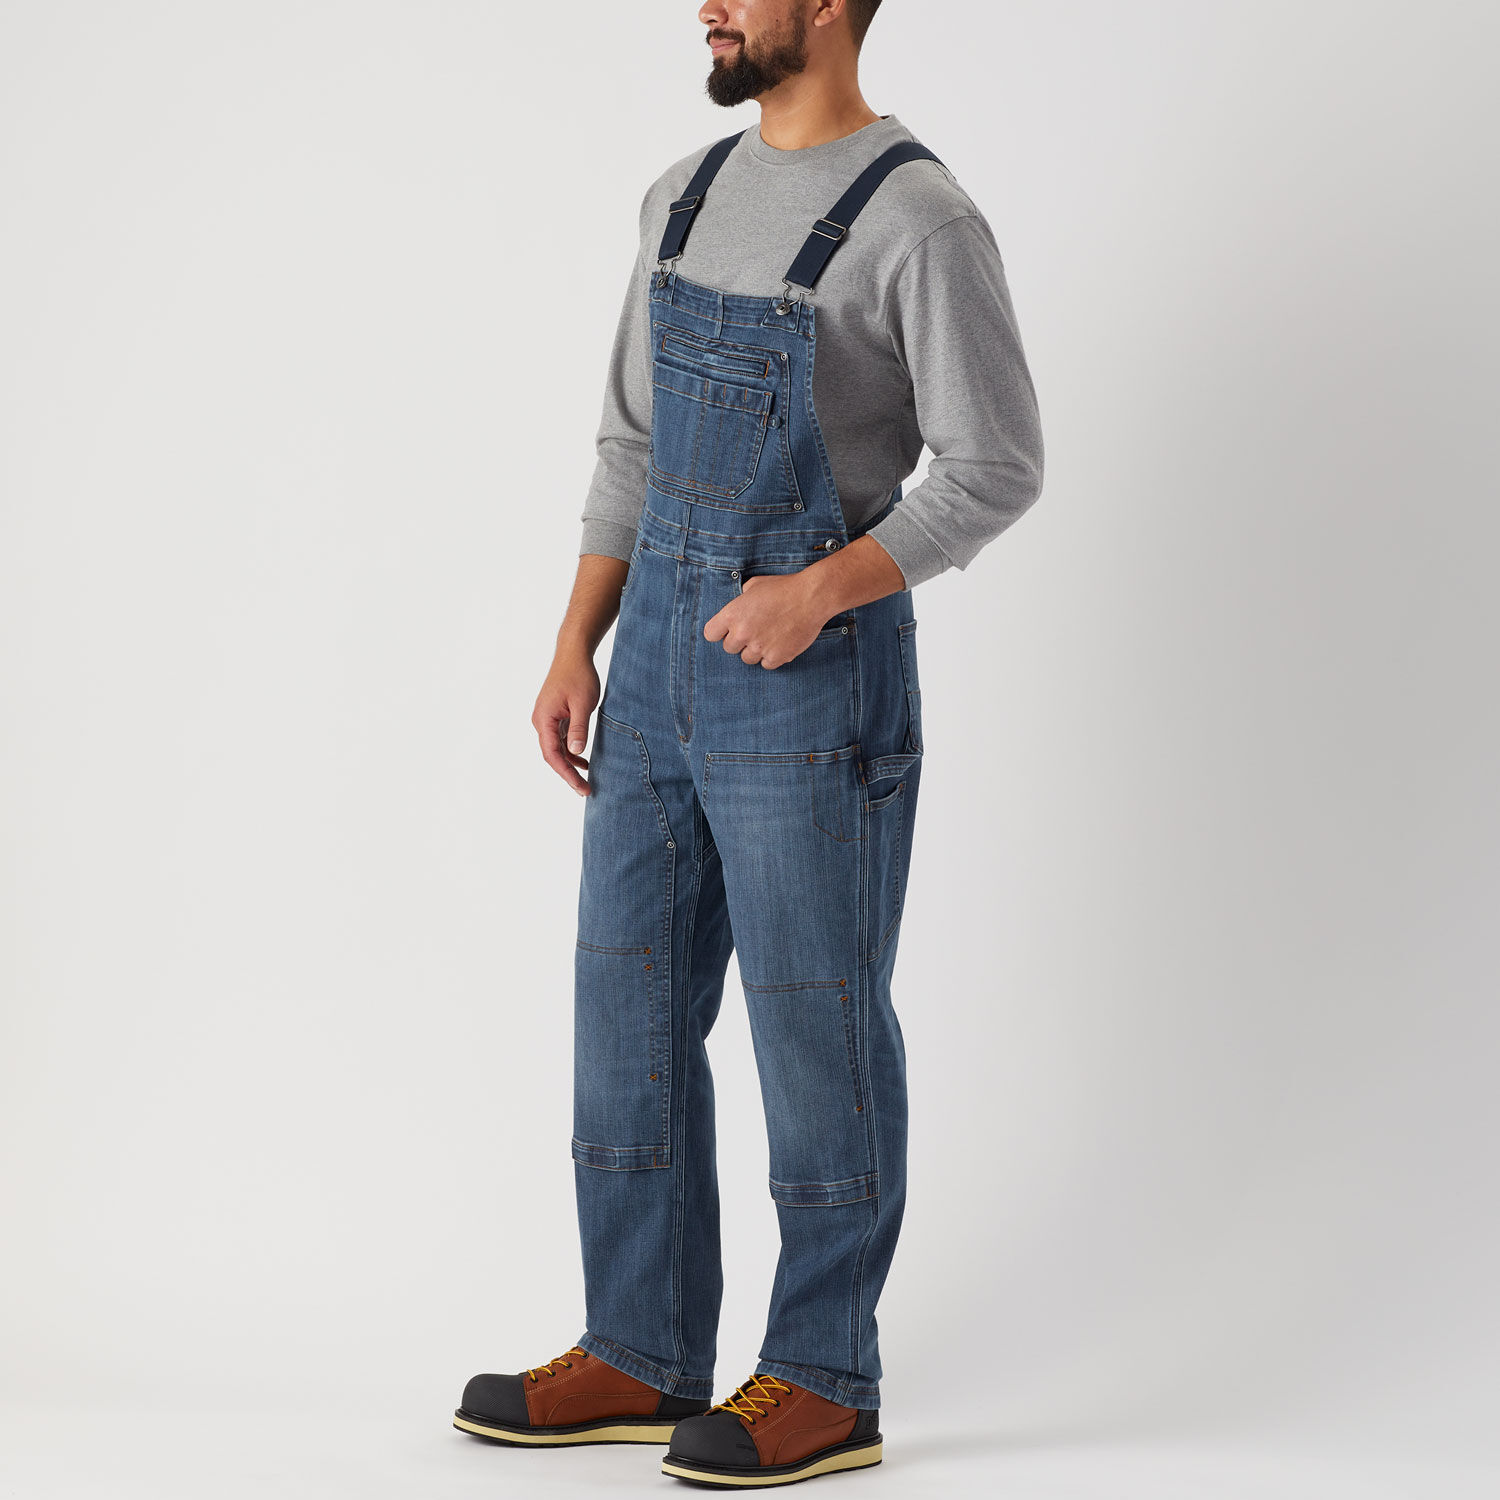 Amazon.com: Carhartt Men's Washed Denim Bib Overalls,Darkstone,36W x 28L:  Overalls And Coveralls Workwear Apparel: Clothing, Shoes & Jewelry